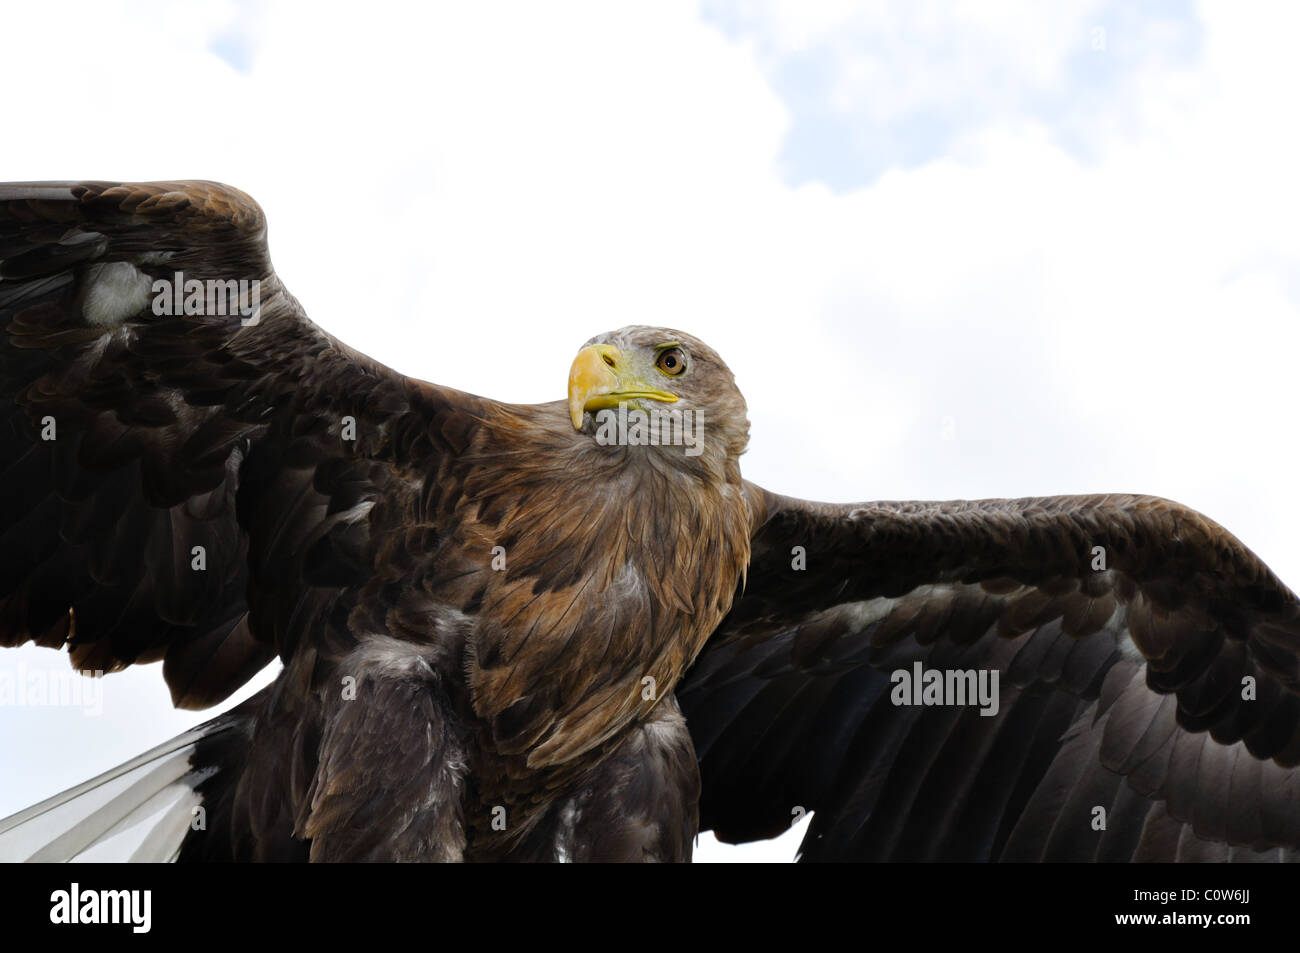 Majestic Eagle Posing with wings outstretched Stock Photo